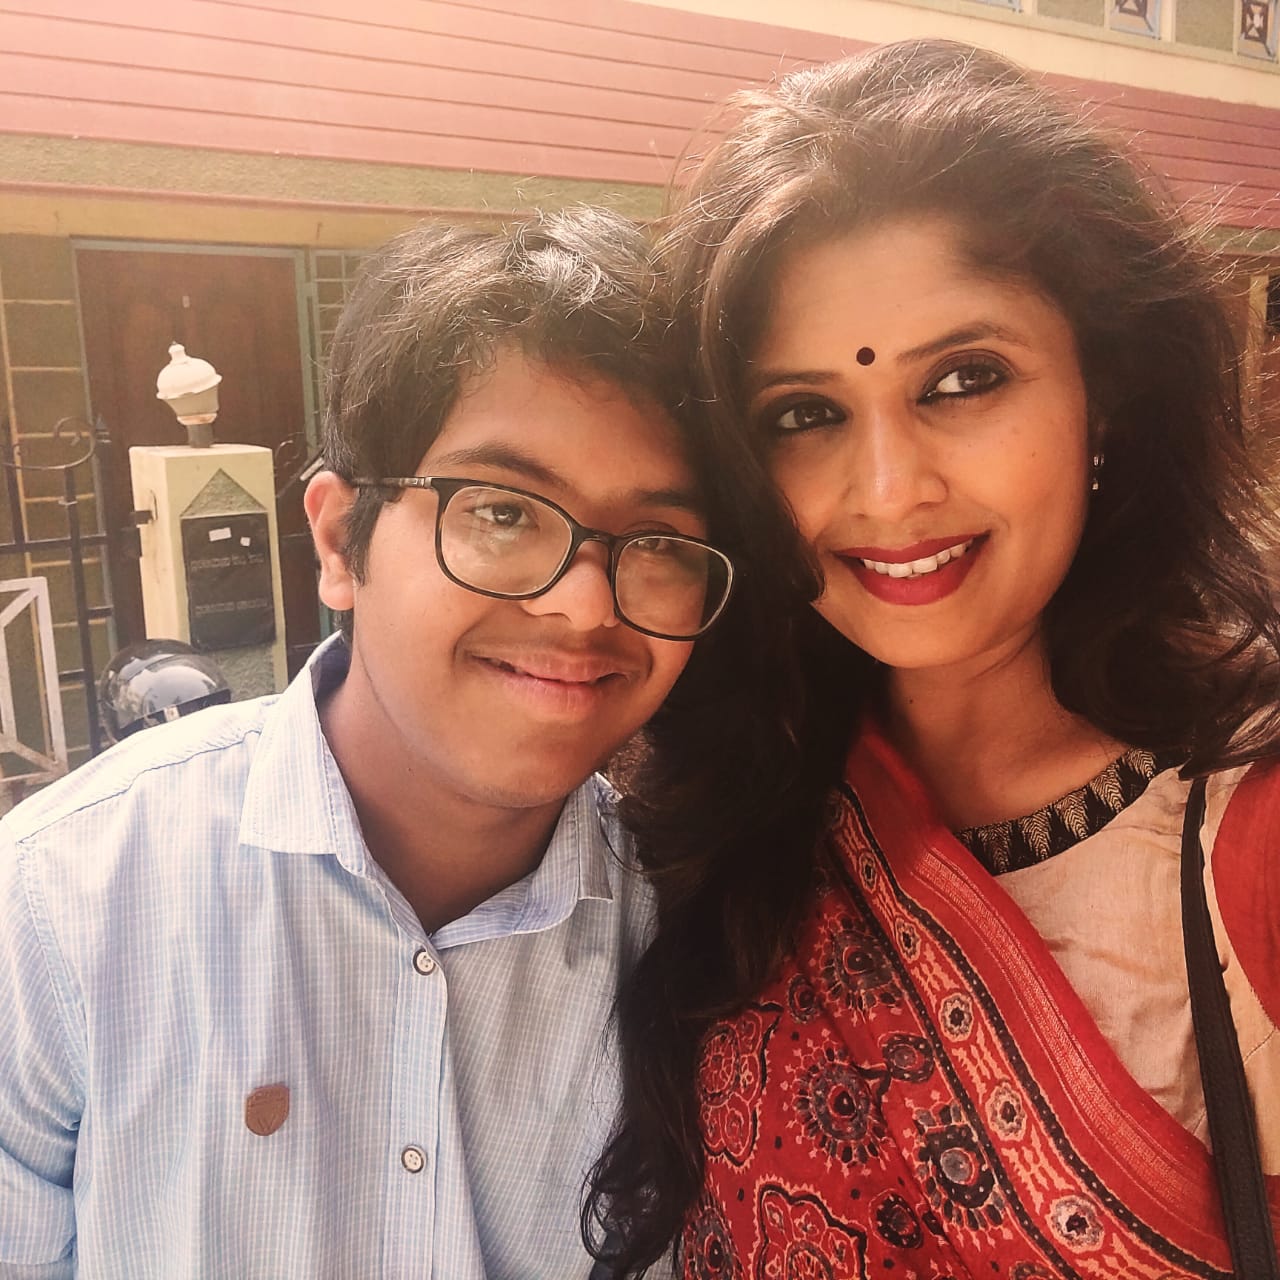 A photo of Purab and Nayana, Purab's mother with her hand on his shoulder